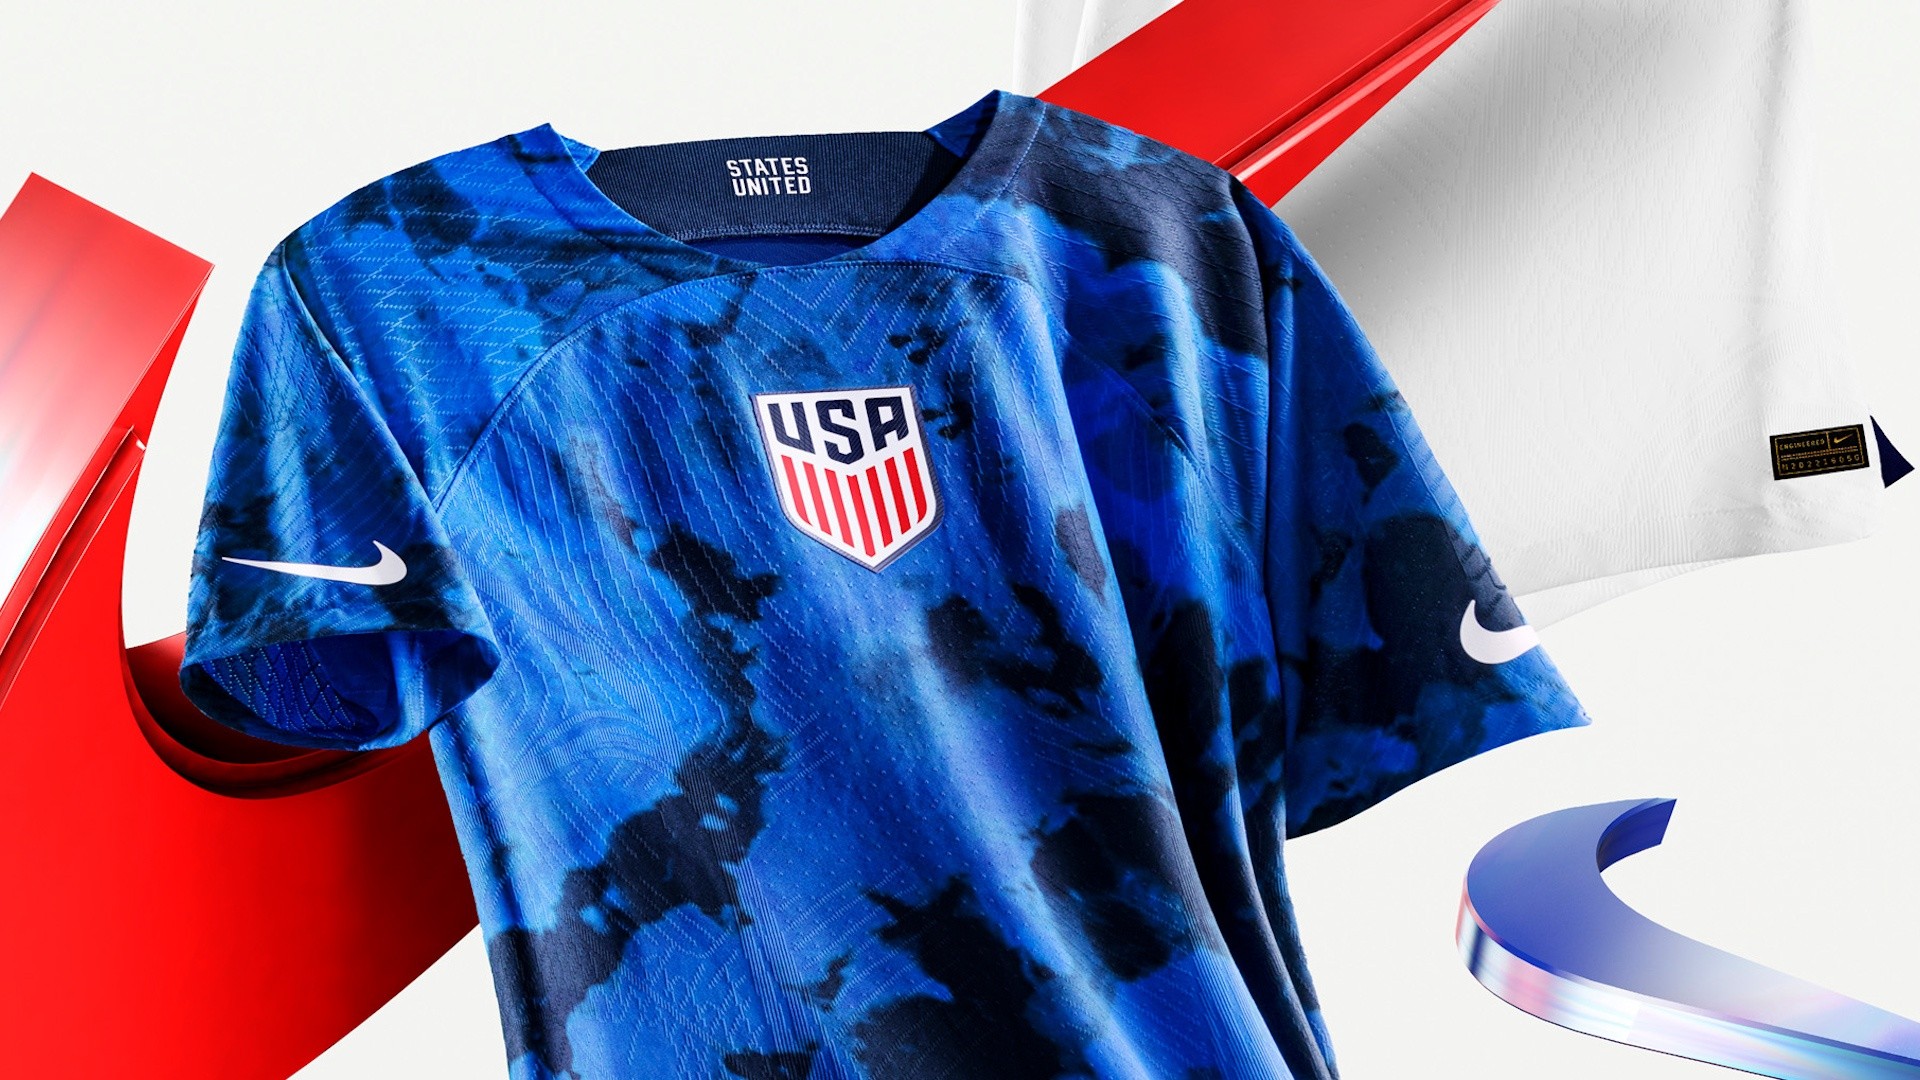 USWNT Home Jersey Sets New Sales Record as Nike.com's Most Sold